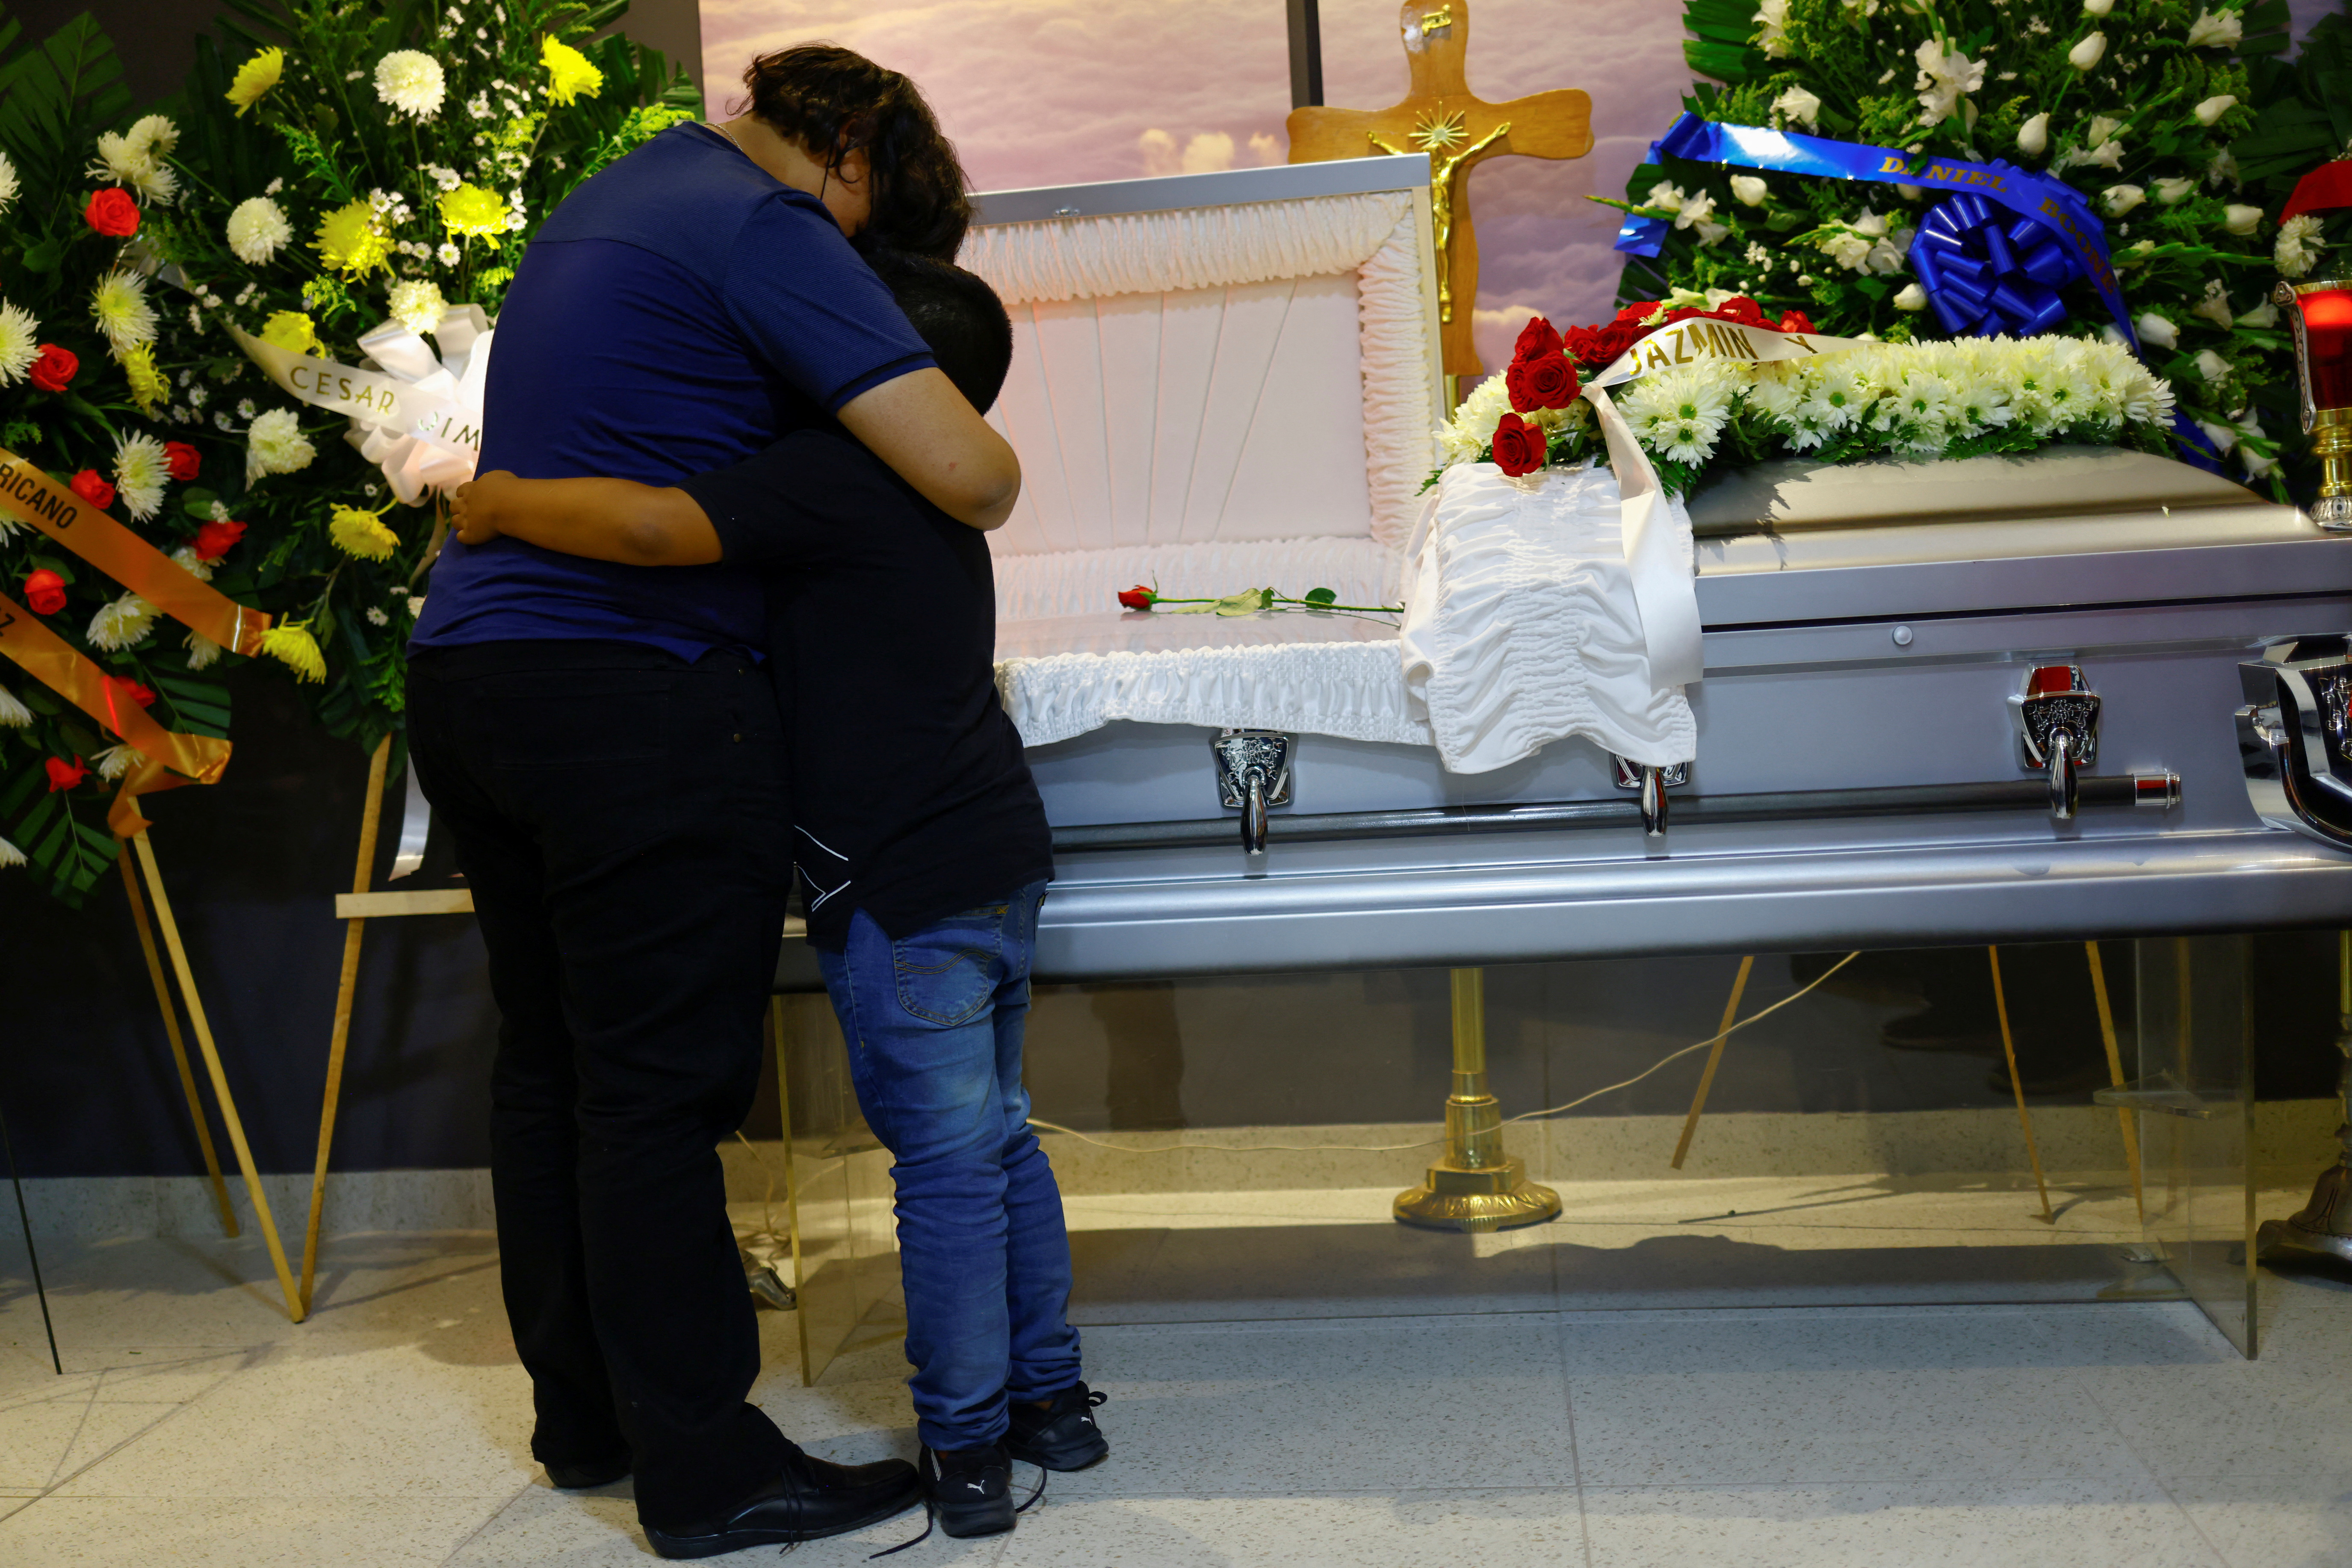 The children of Manuel Alejandro Arriaga, who was killed last week along with three coworkers of Switch radio station, hug in front of his coffin during the funeral in Ciudad Juarez, Mexico, August 15, 2022. REUTERS/Jose Luis Gonzalez